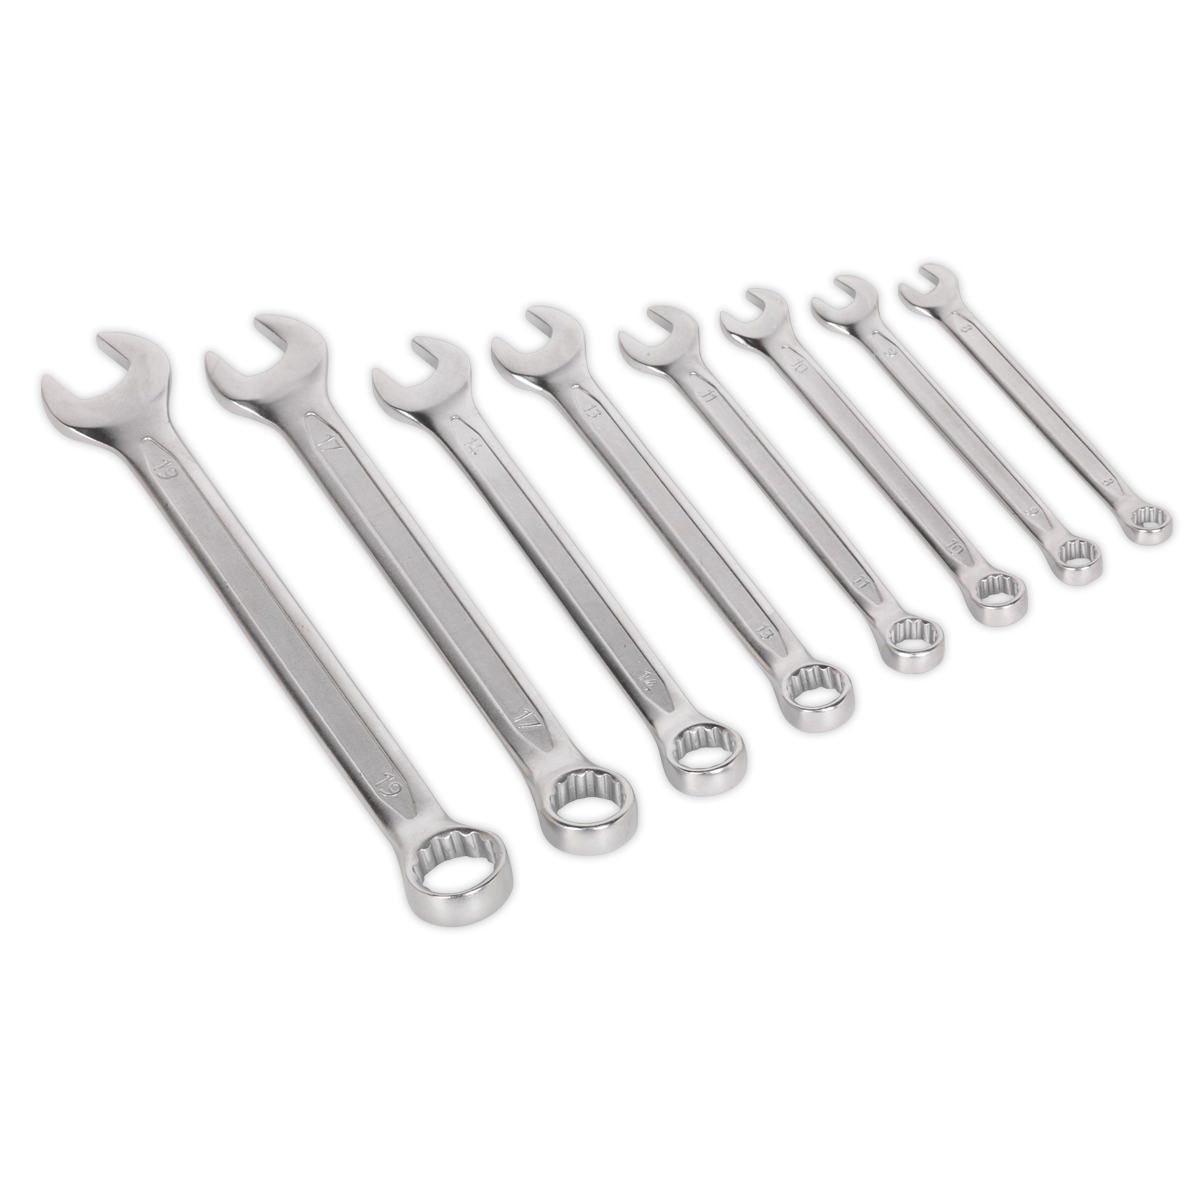 SEALEY - AK63252 Combination Spanner Set 8pc Cold Stamped Metric